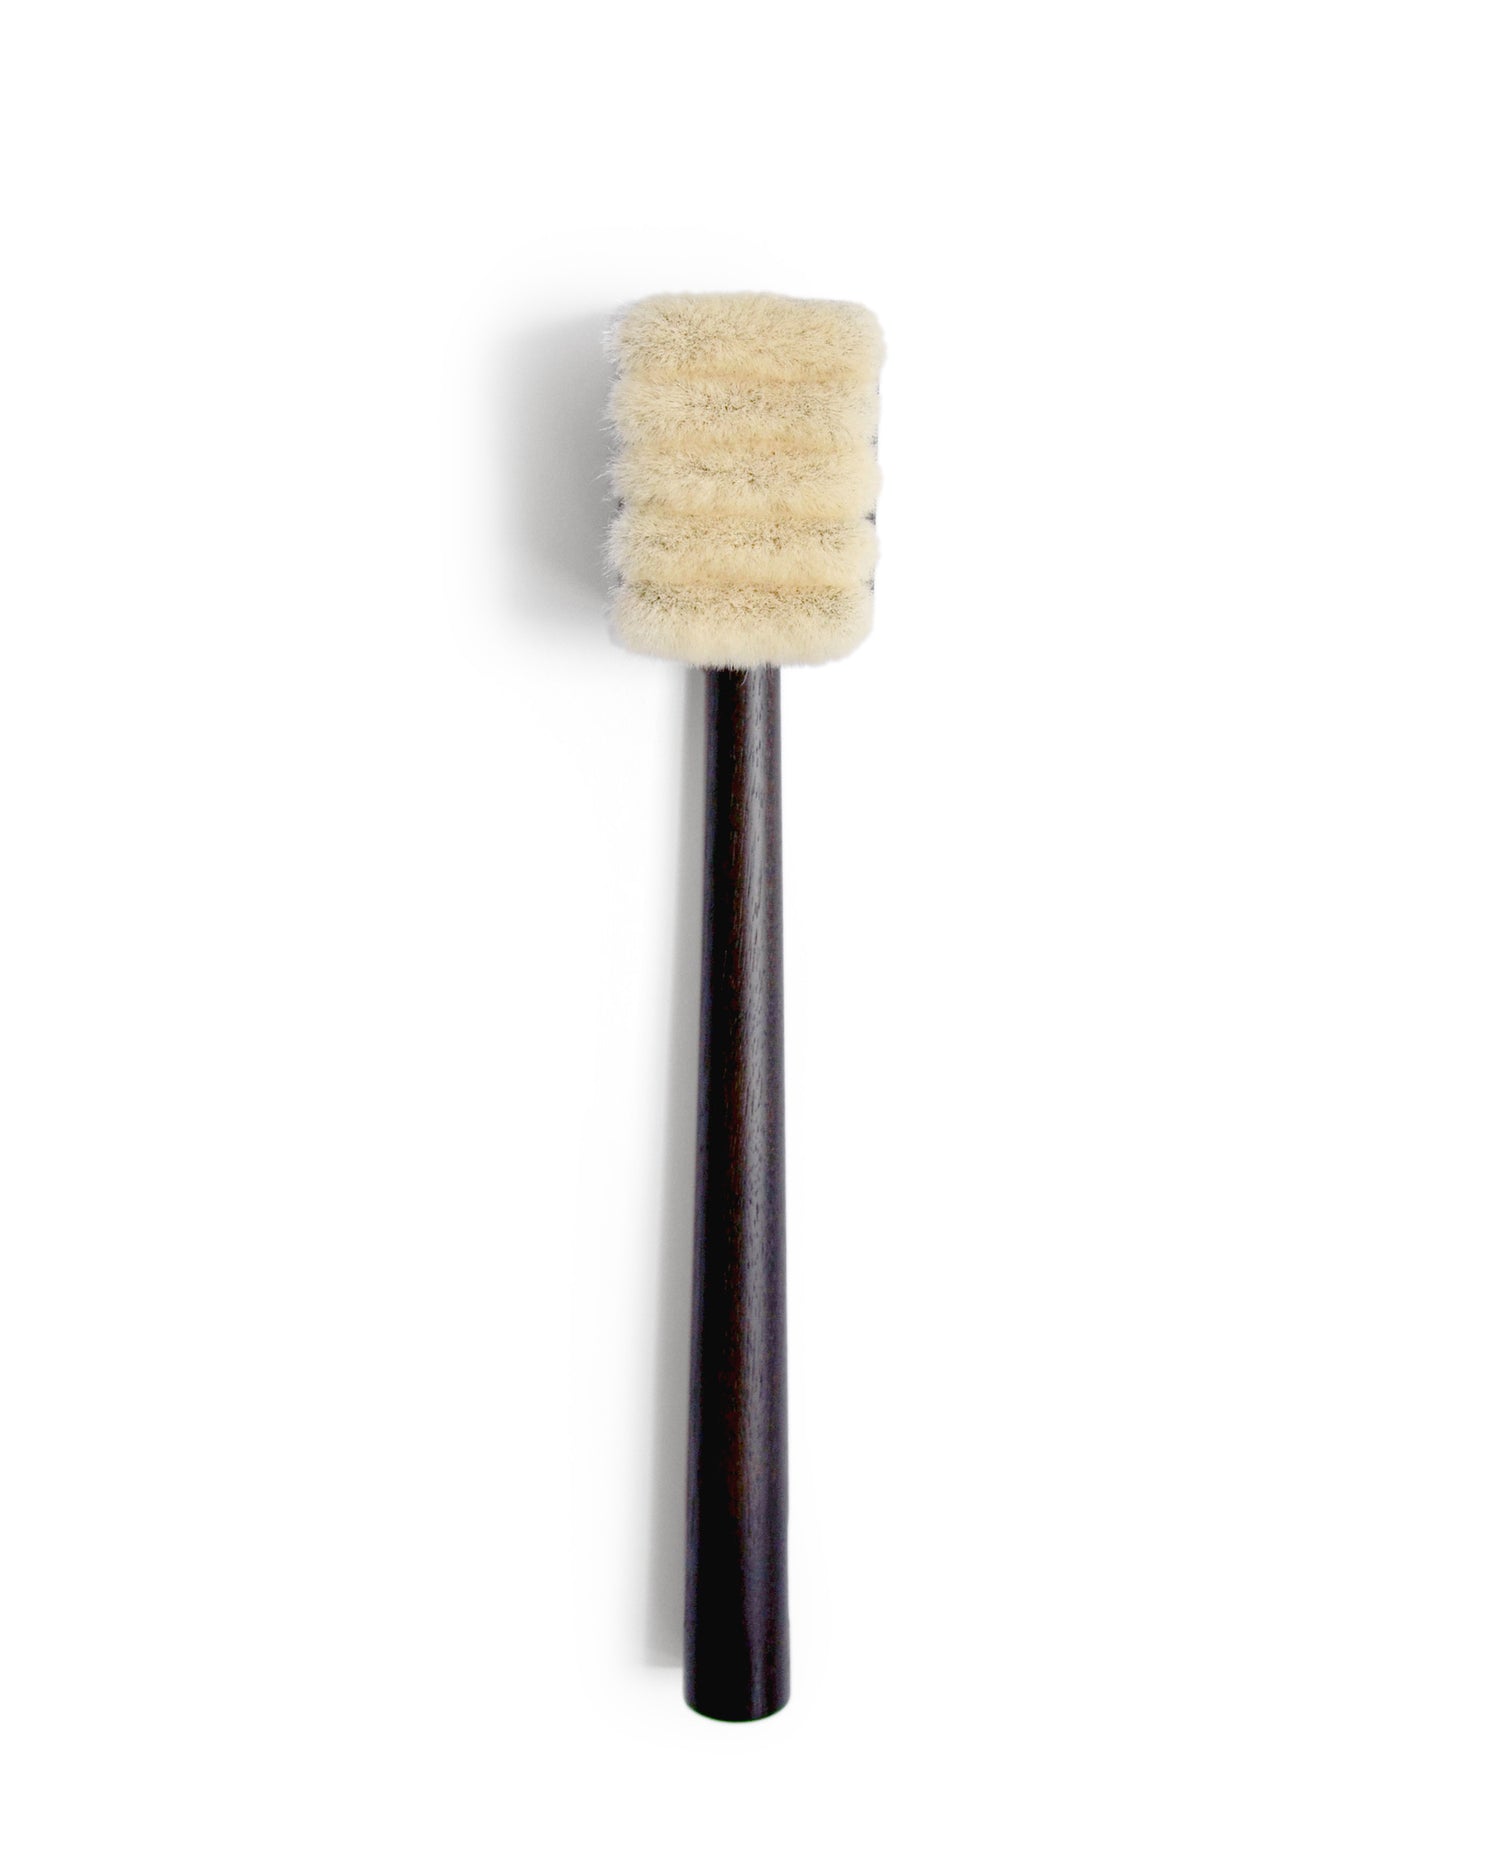 Silhouetted image of long jiva body brush with dark wood handle and light bristles by Shaquda against white background.